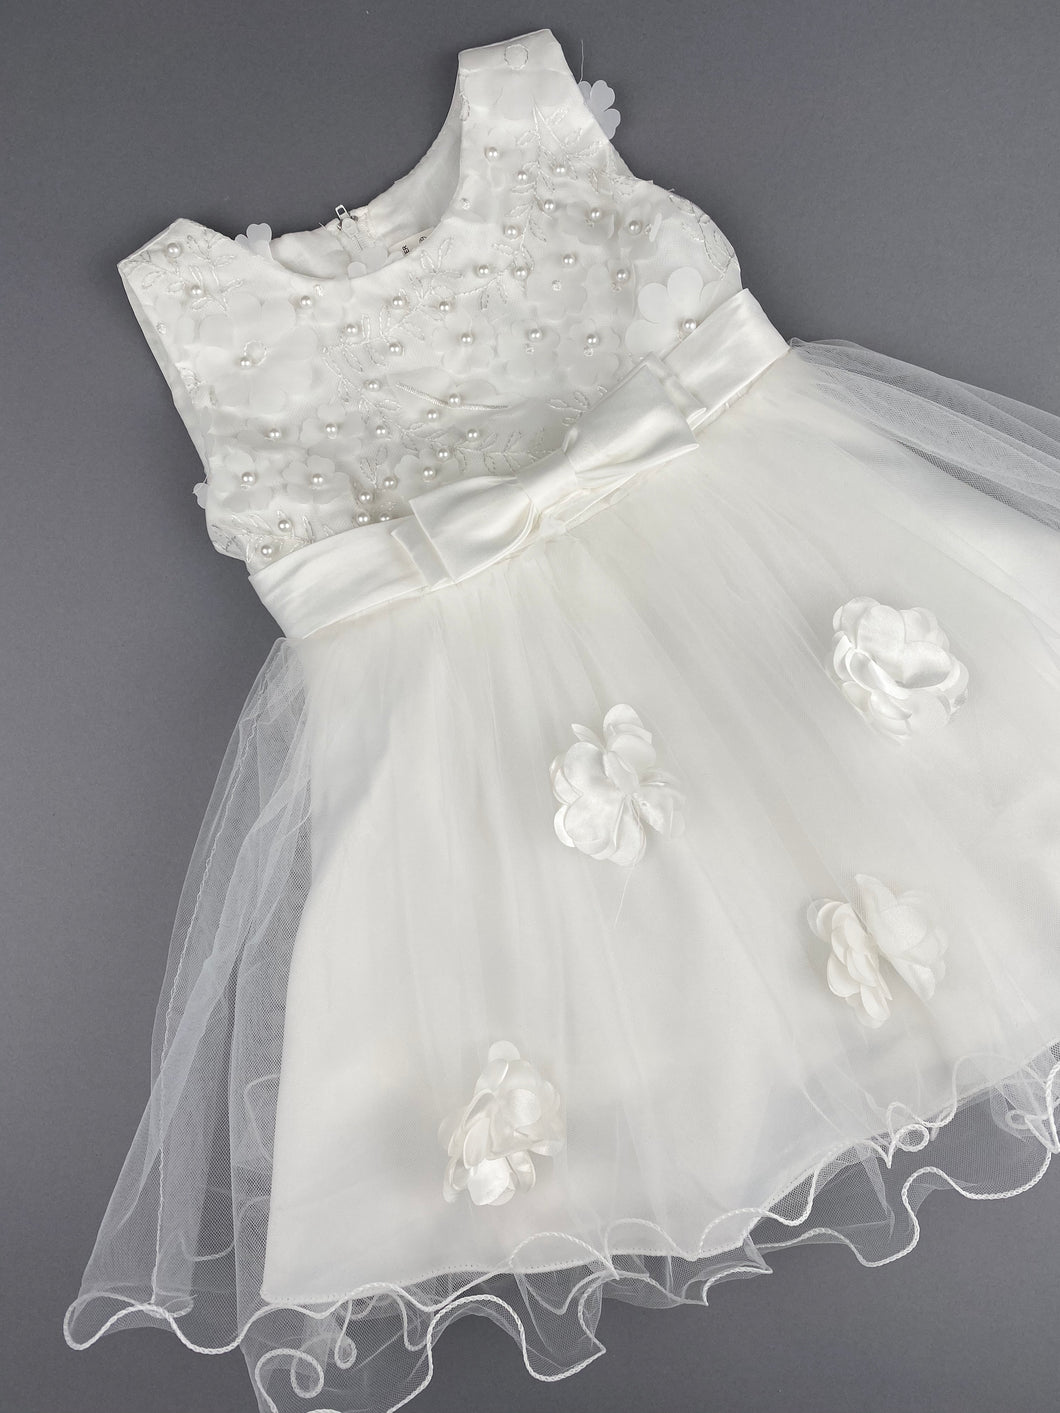 Girls Christening Baptismal Dress 47 with Pearls and Flowers